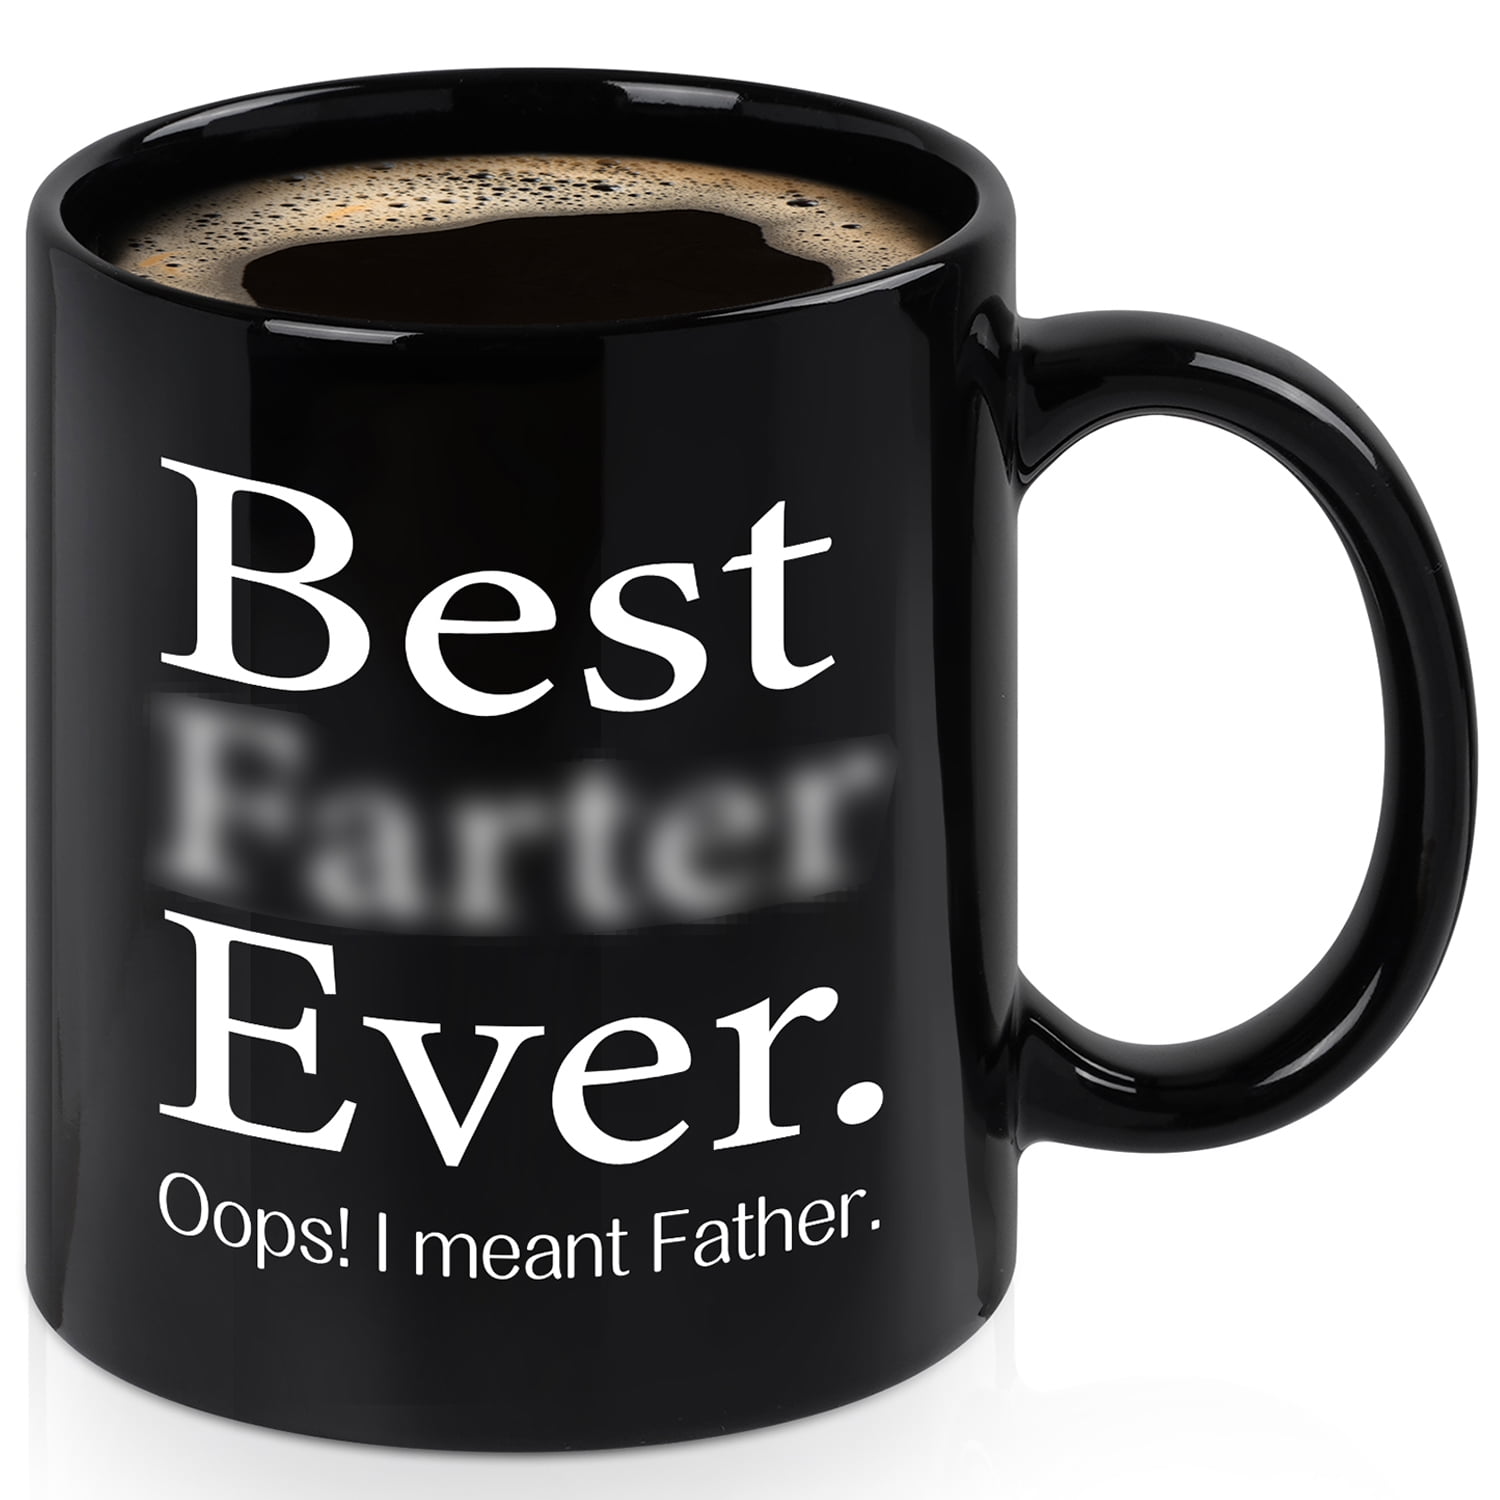 Why the Mr. Coffee Mug Warmer is the perfect gift for my dad this Christmas